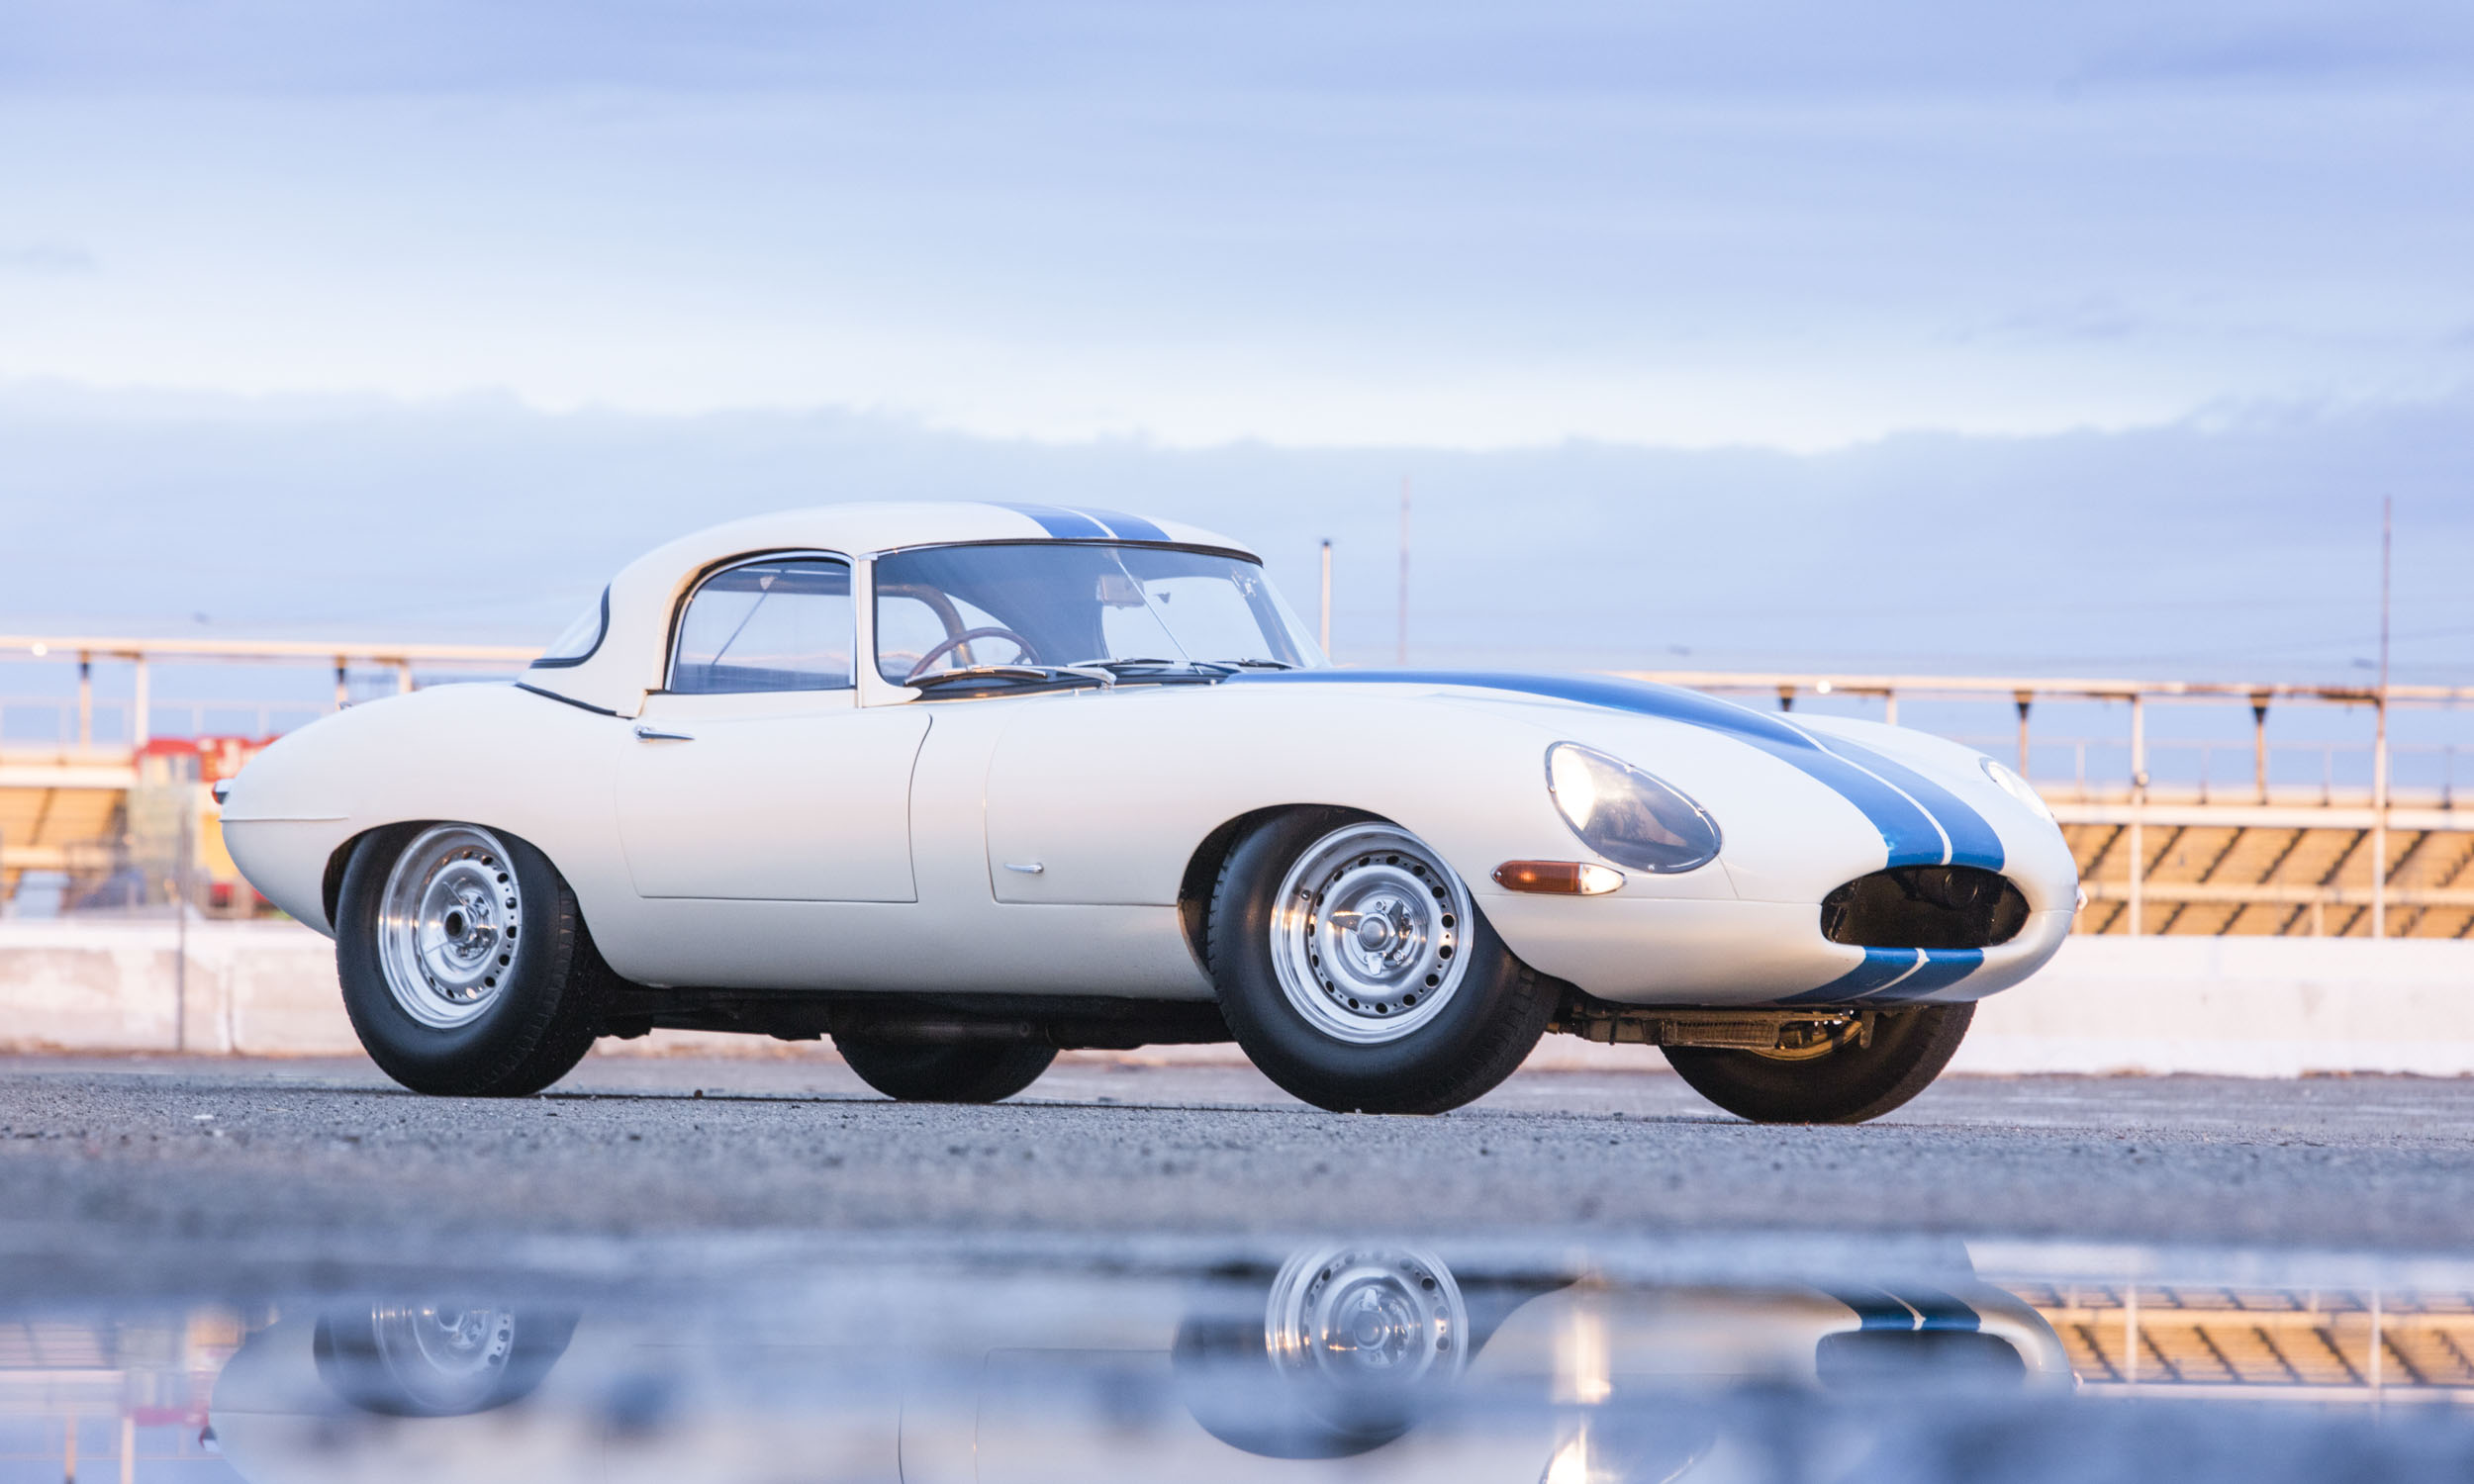 20 Collector Cars Sold for $180 Million in 2017